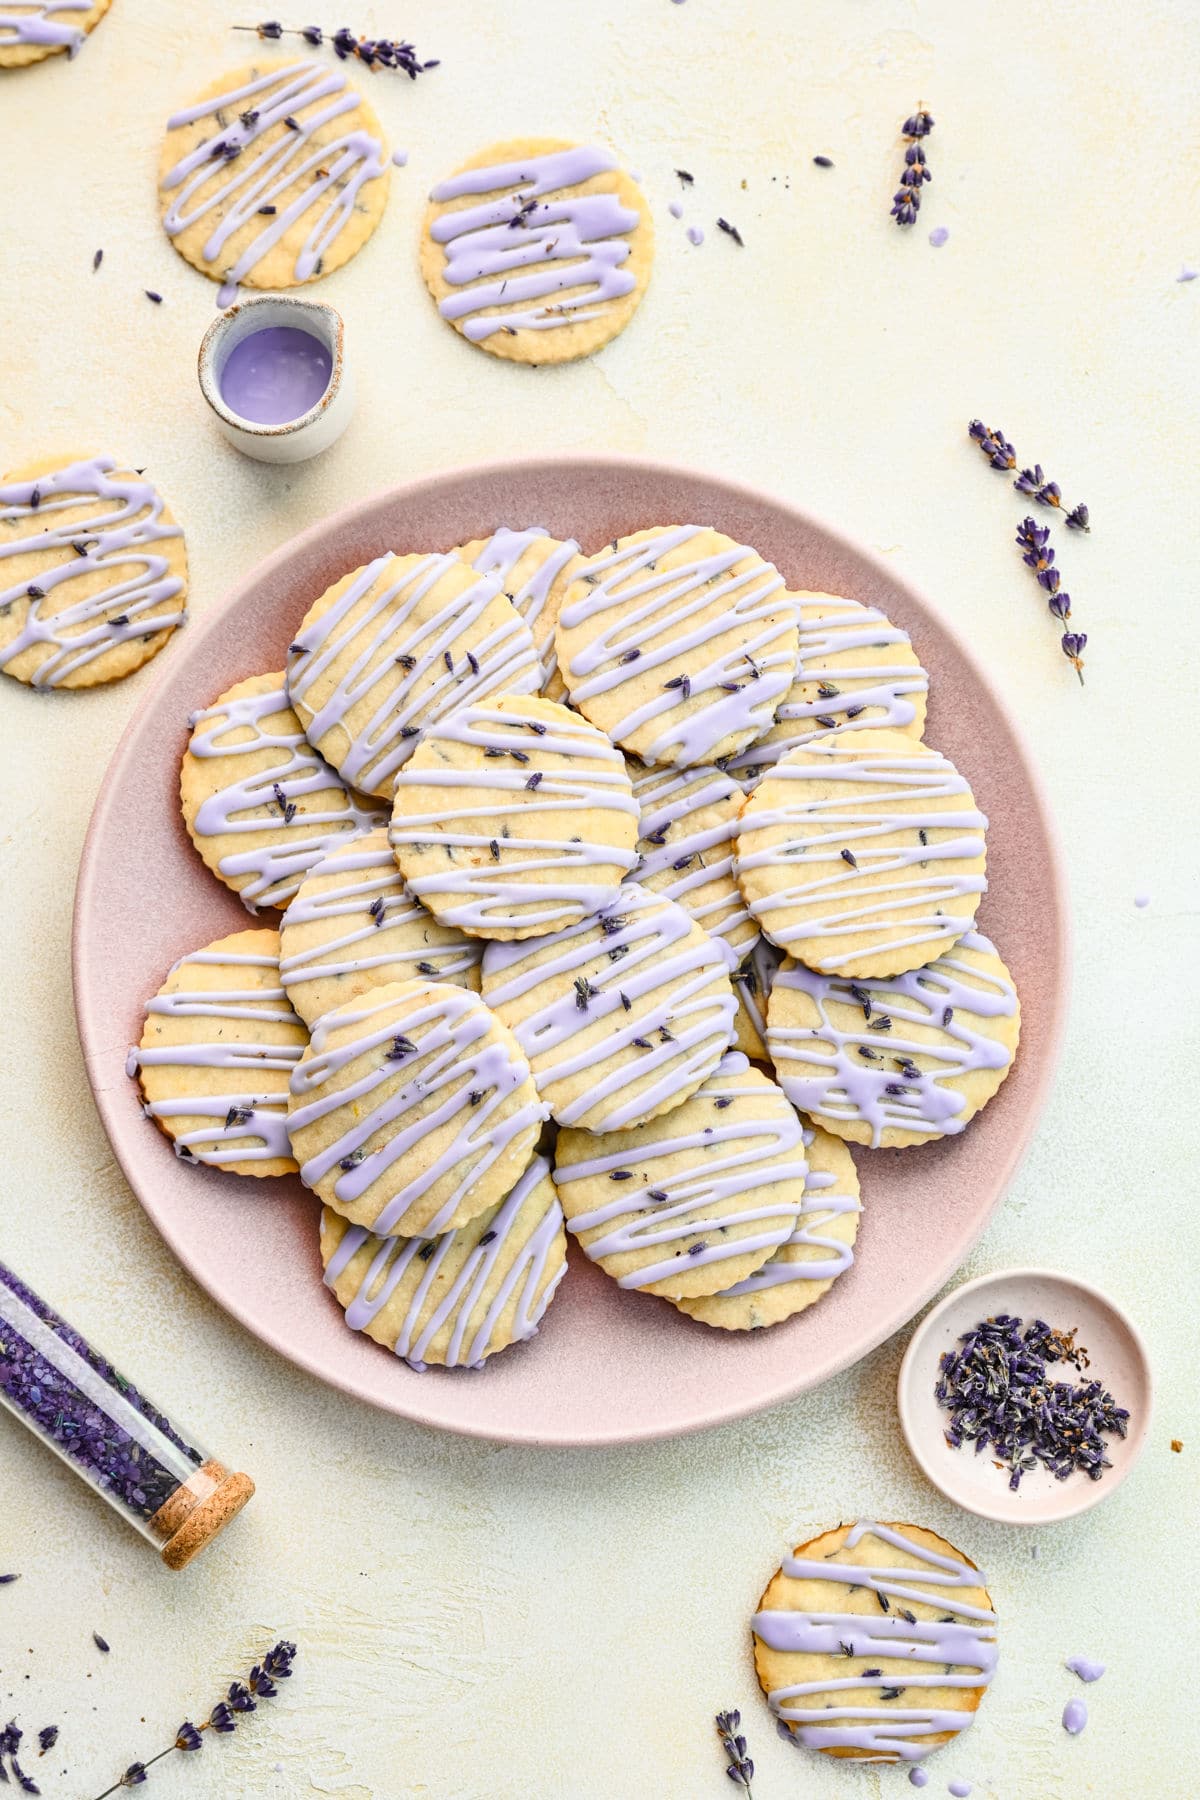 A plate of lavender cookies with a dish of lavender next to it.